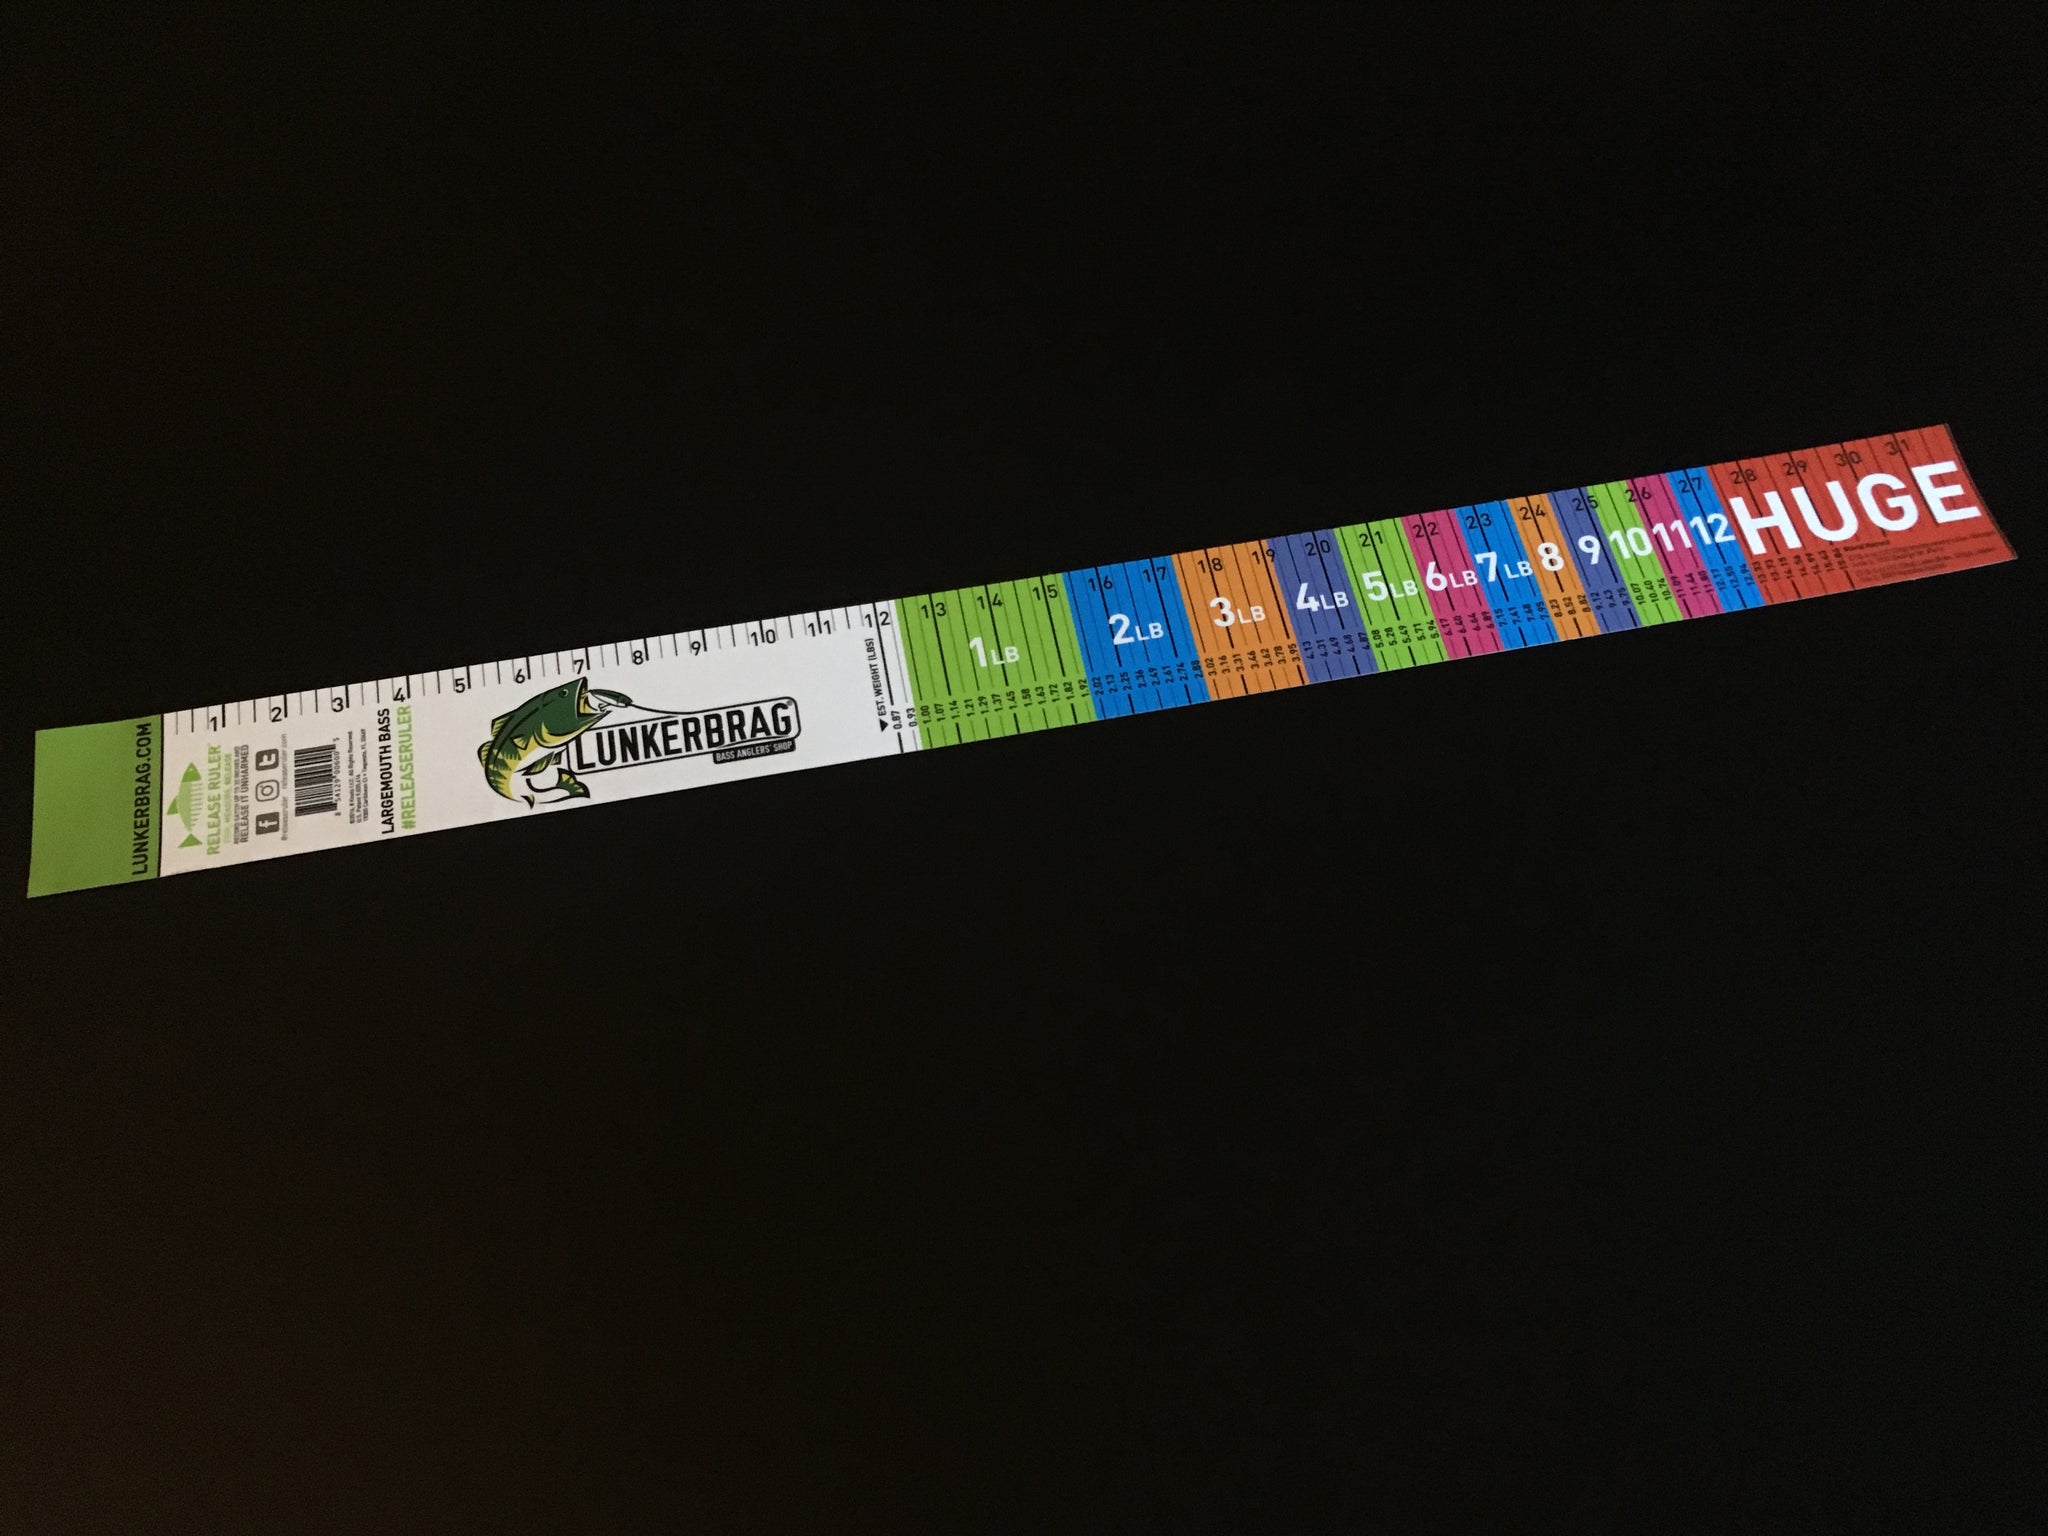 Largemouth Bass Release Ruler Decal Lunkerbrag